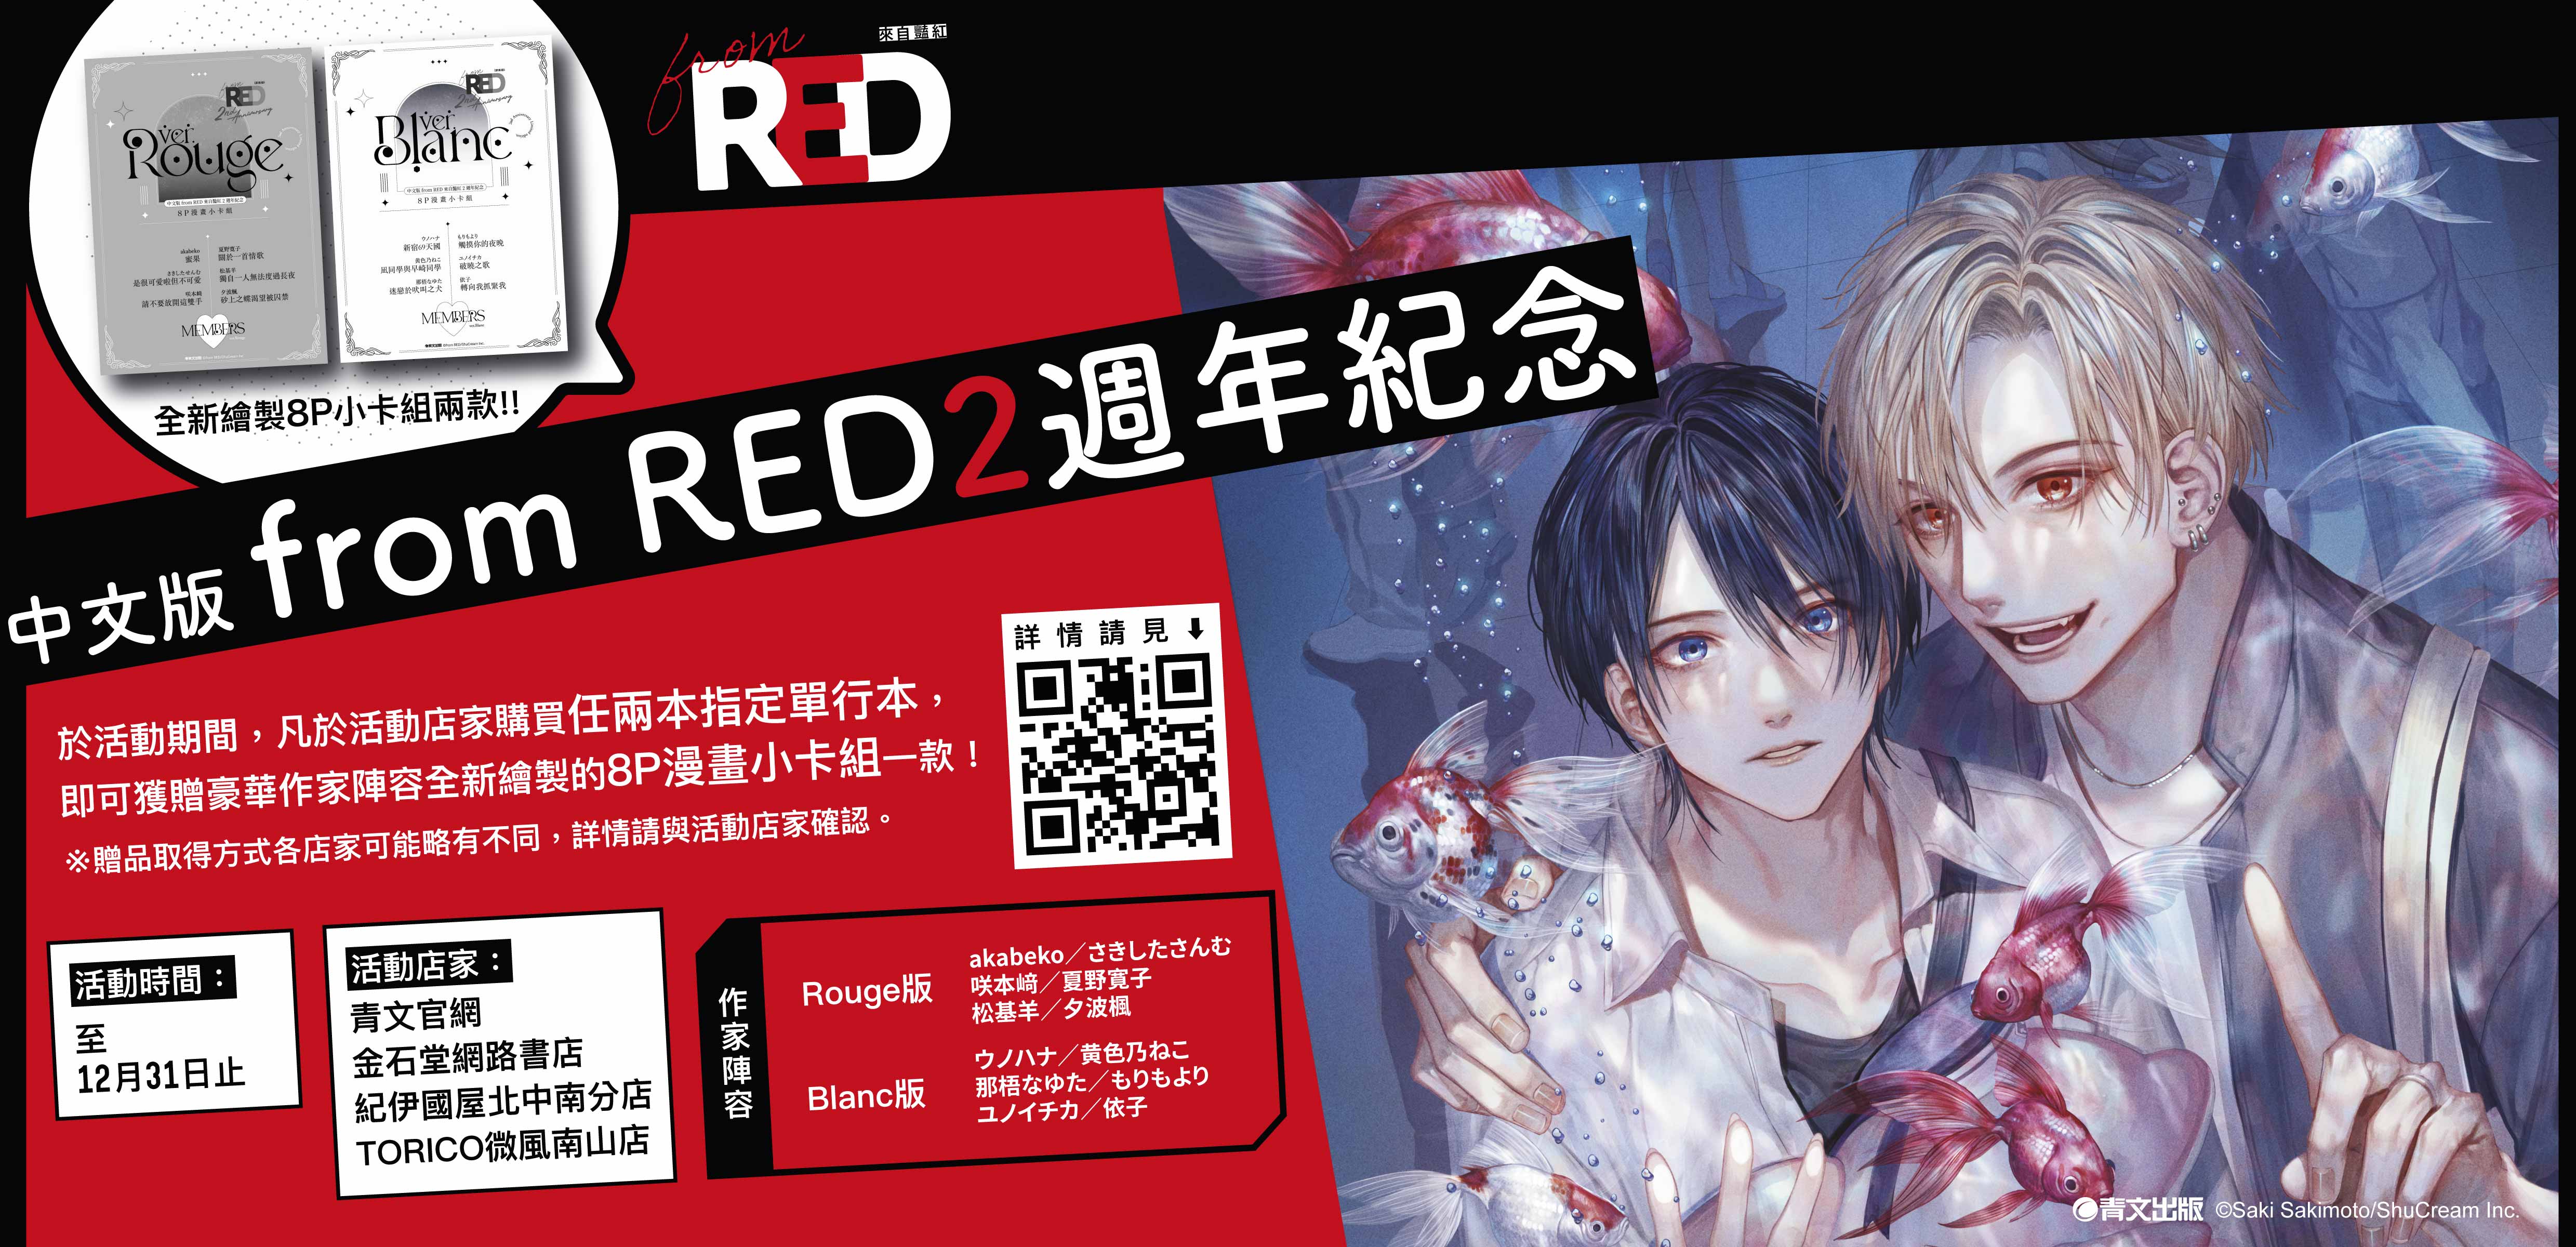 from RED 二週年紀念活動